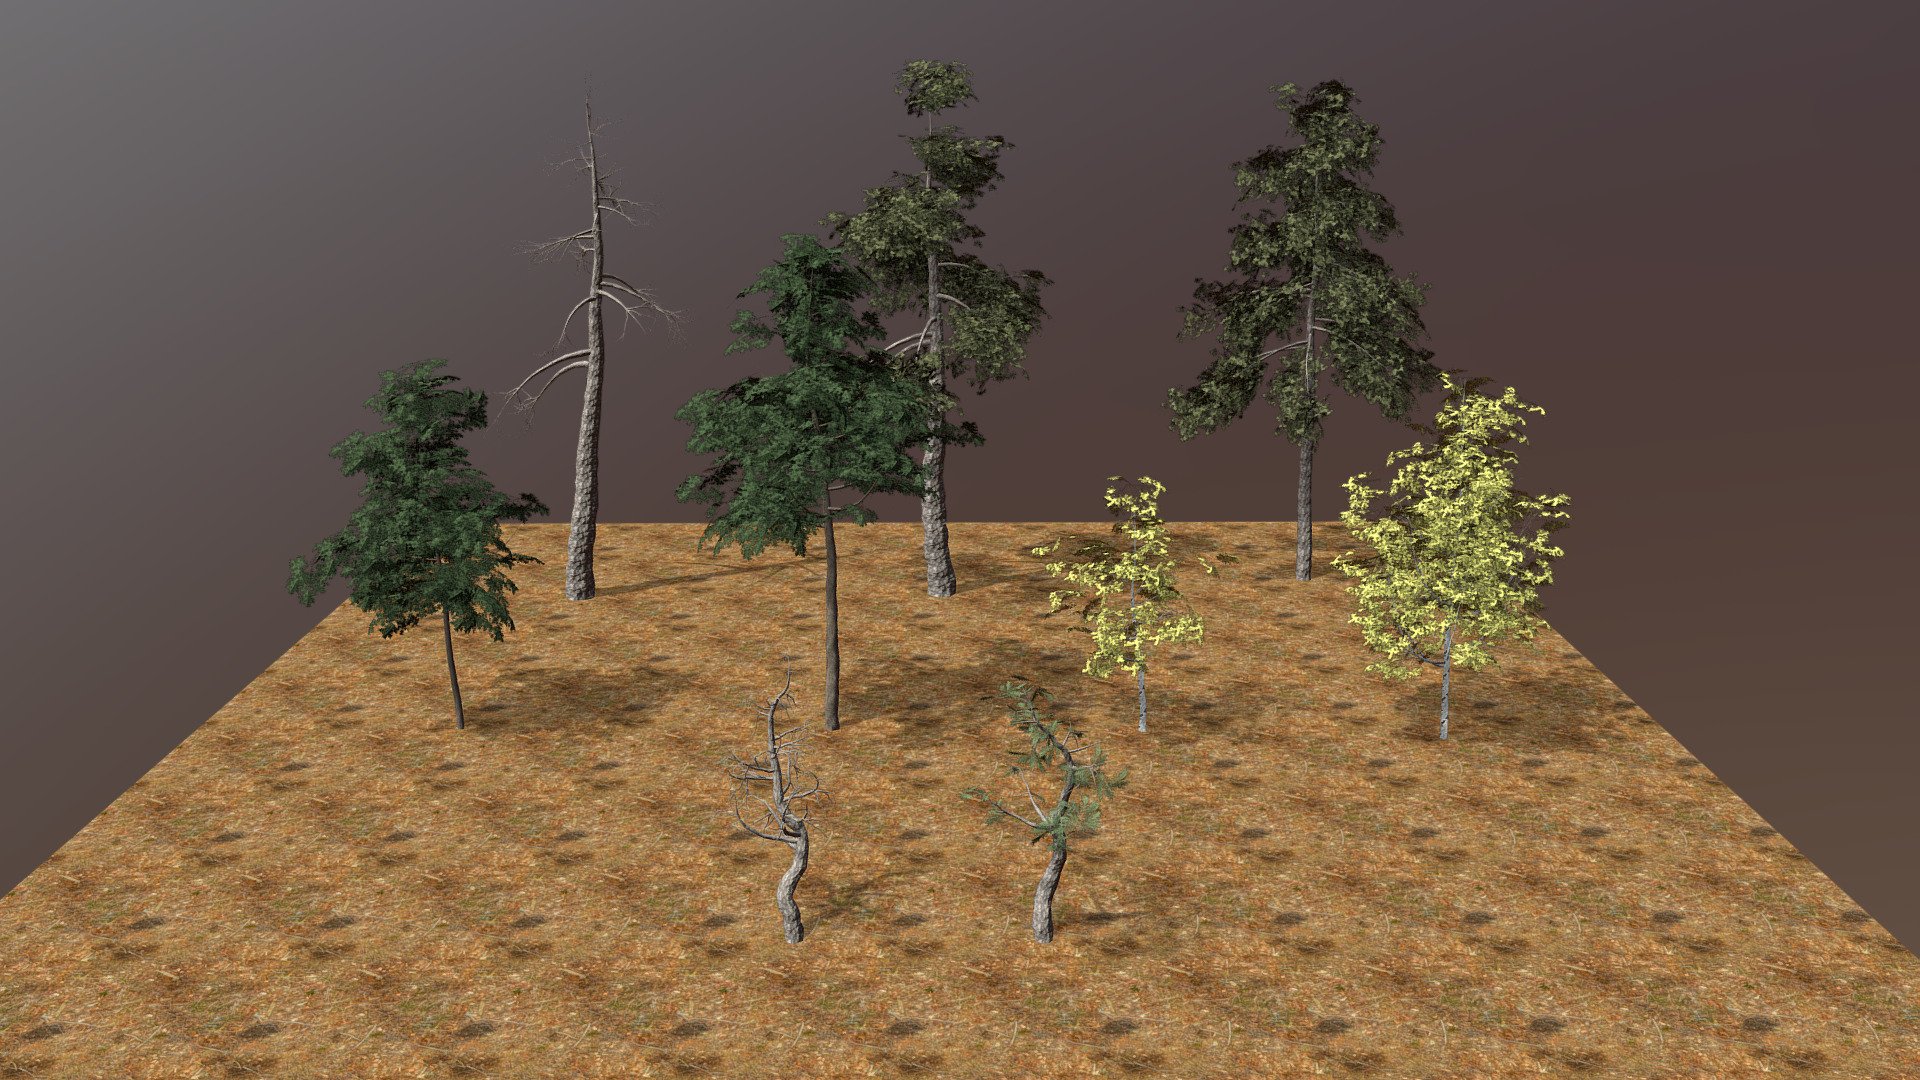 Four different tree species commonly found in the mountains (9 different tree models).

The types of trees found in this pack include:
* Ponderosa Pines
* Maple Trees
* Aspen Trees
* Junipers

Normal and roughness maps are included on the bark textures.

Please like if you download, it means a lot 3d model